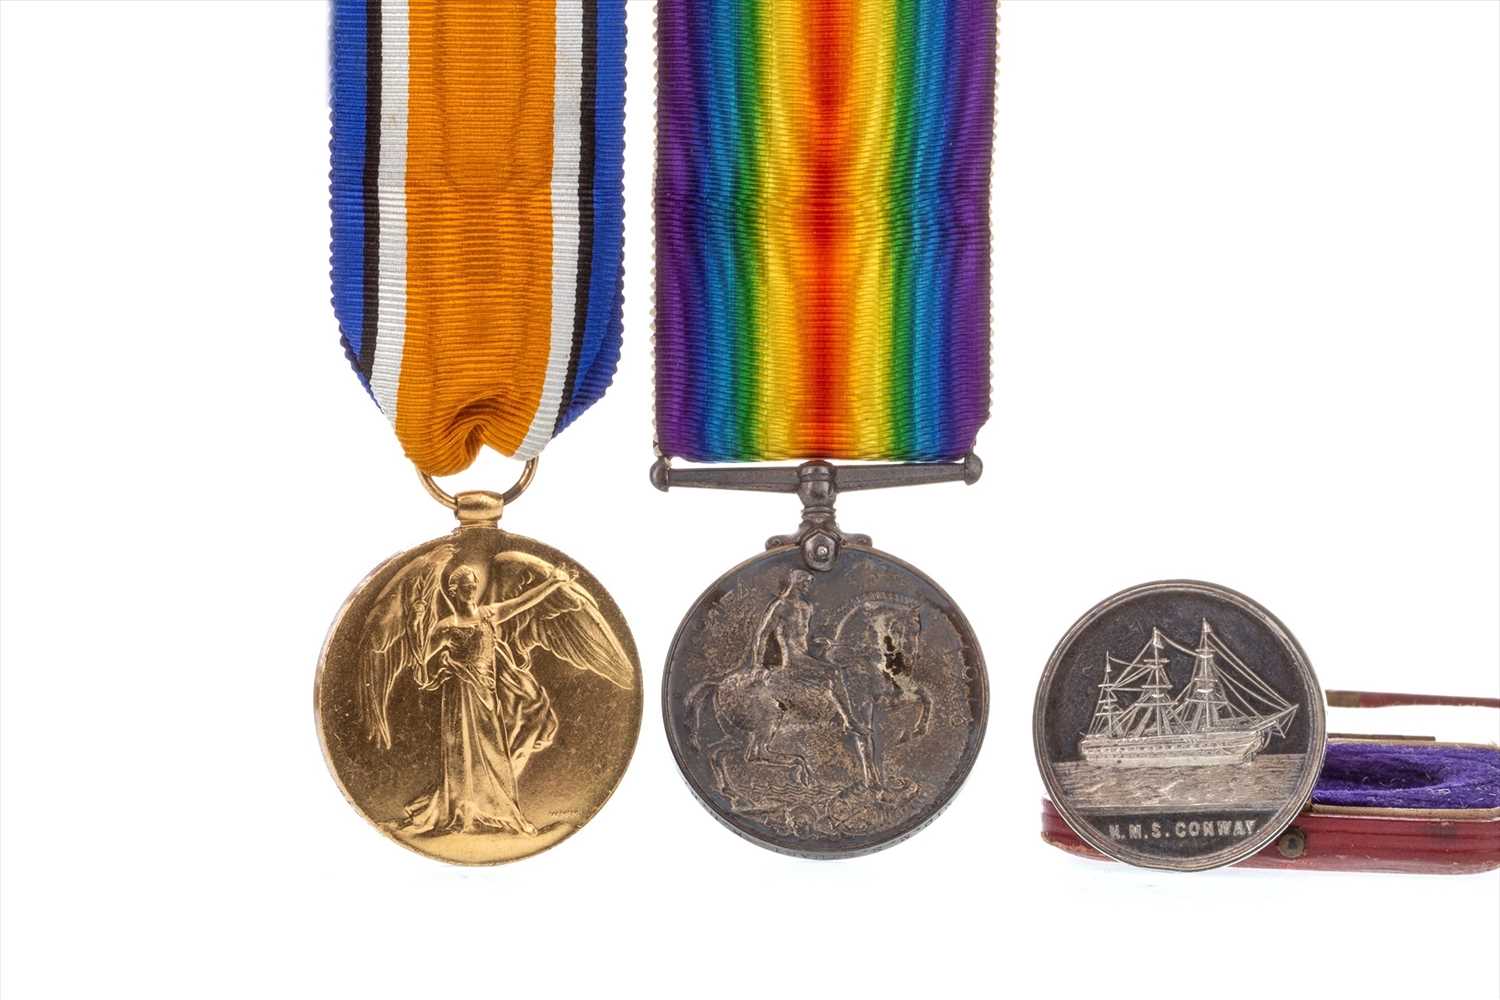 Lot 1713 - A BOXING MEDAL AND TWO MILITARY CAMPAIGN MEDALS